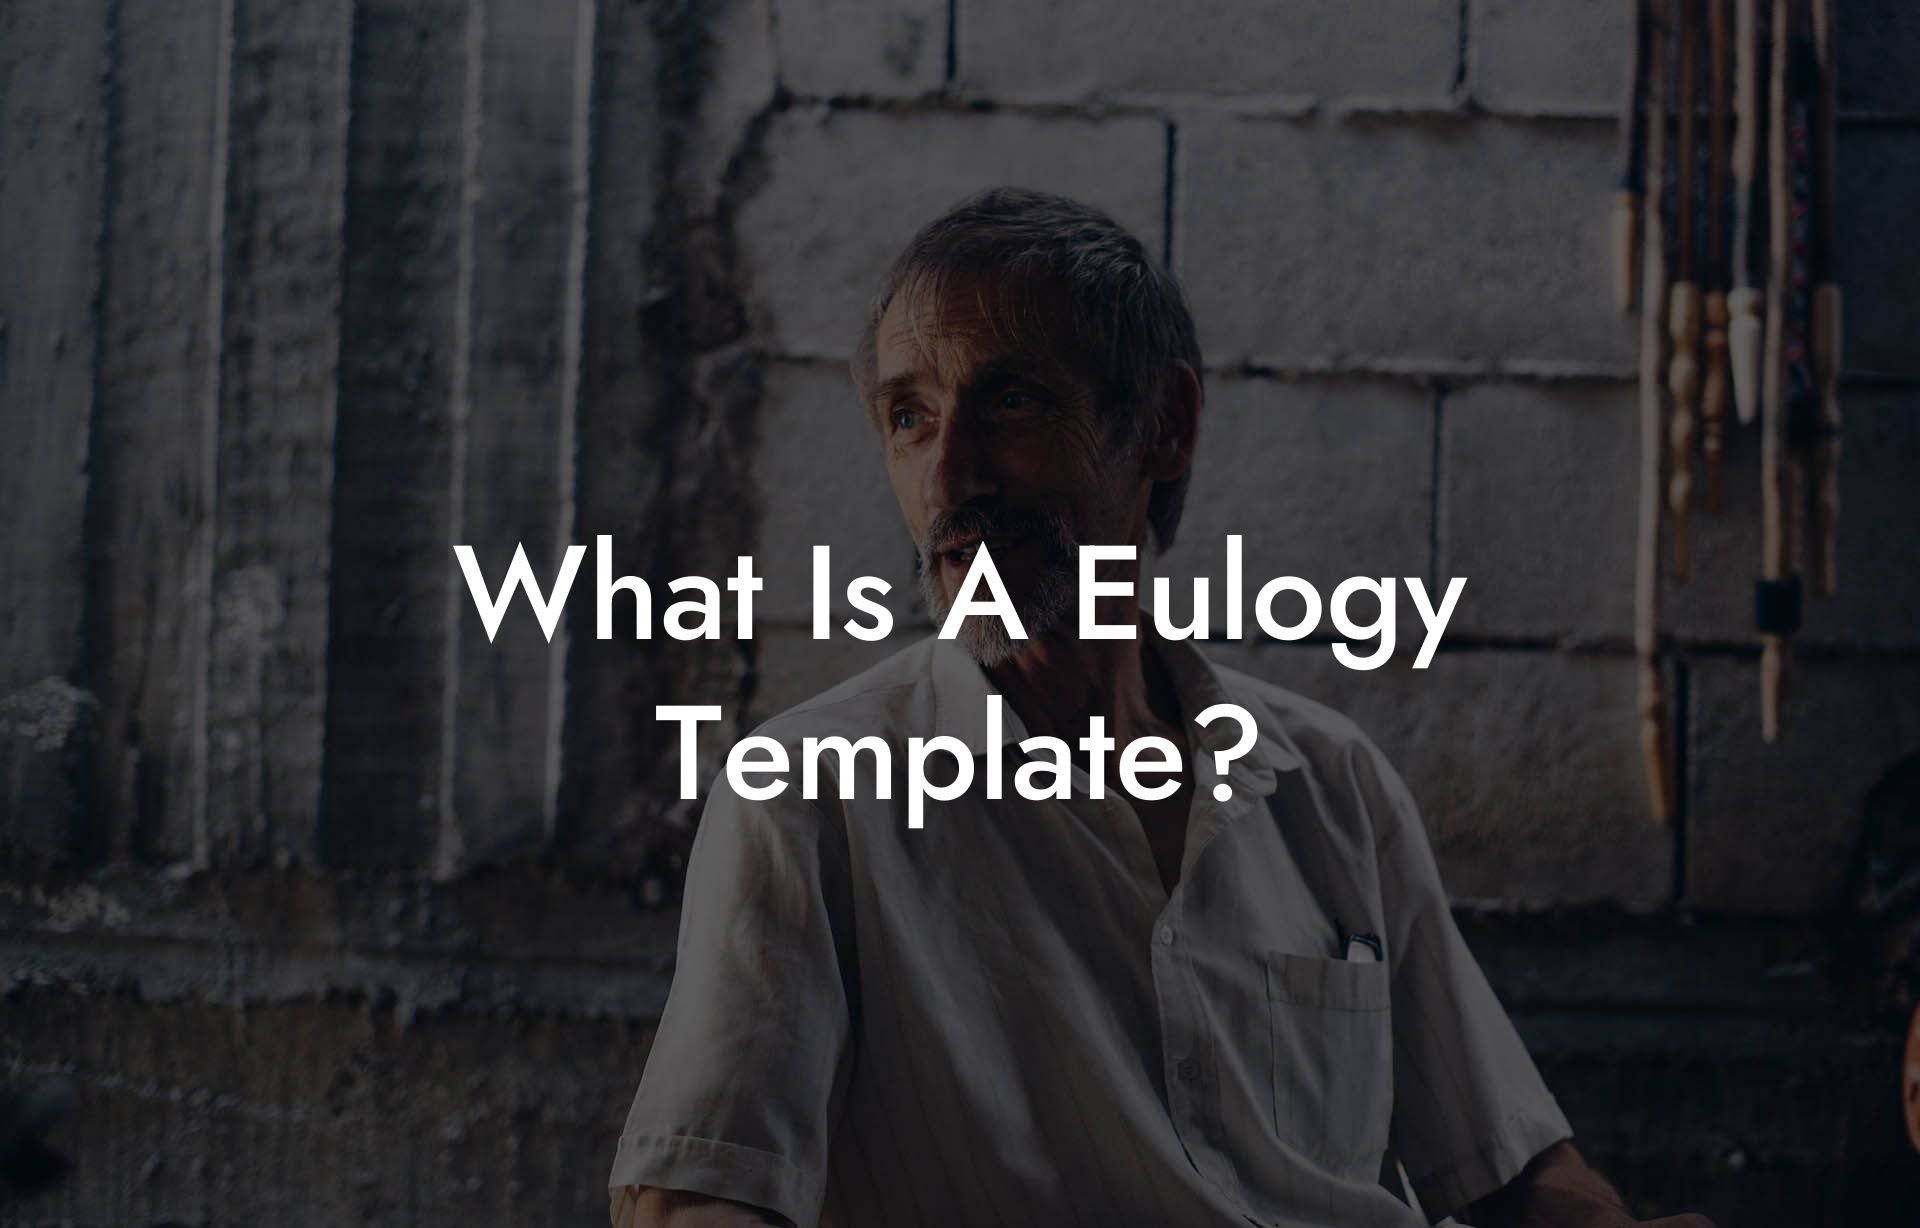 What Is A Eulogy Template?